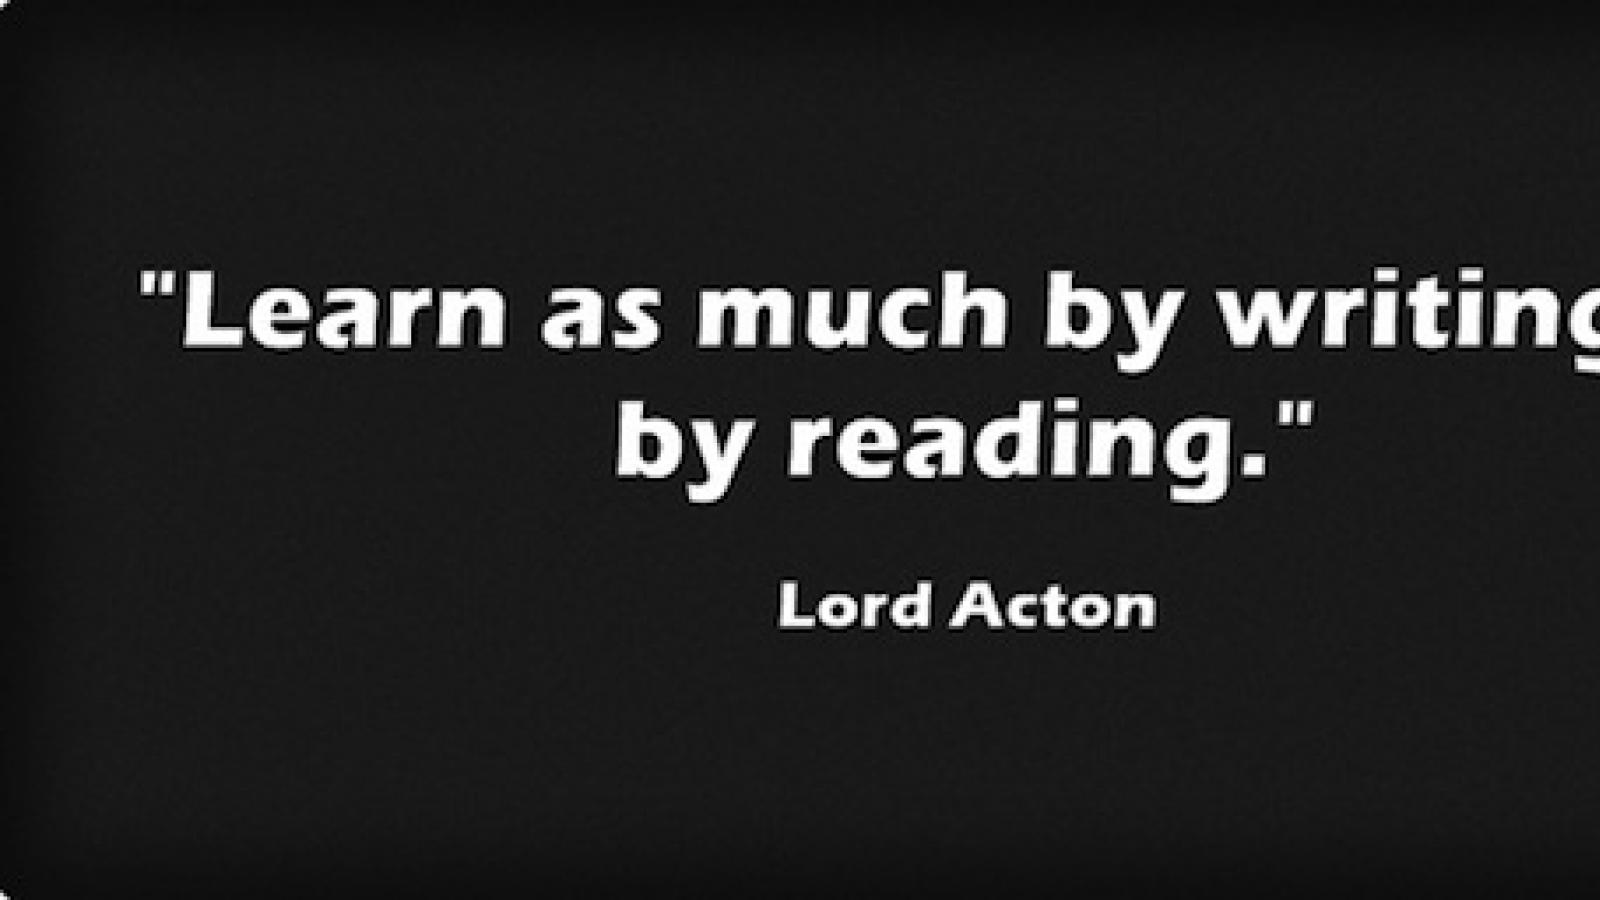 Quote in white letters against black. It says "Learn as much by writing as by reading." Lord Acton